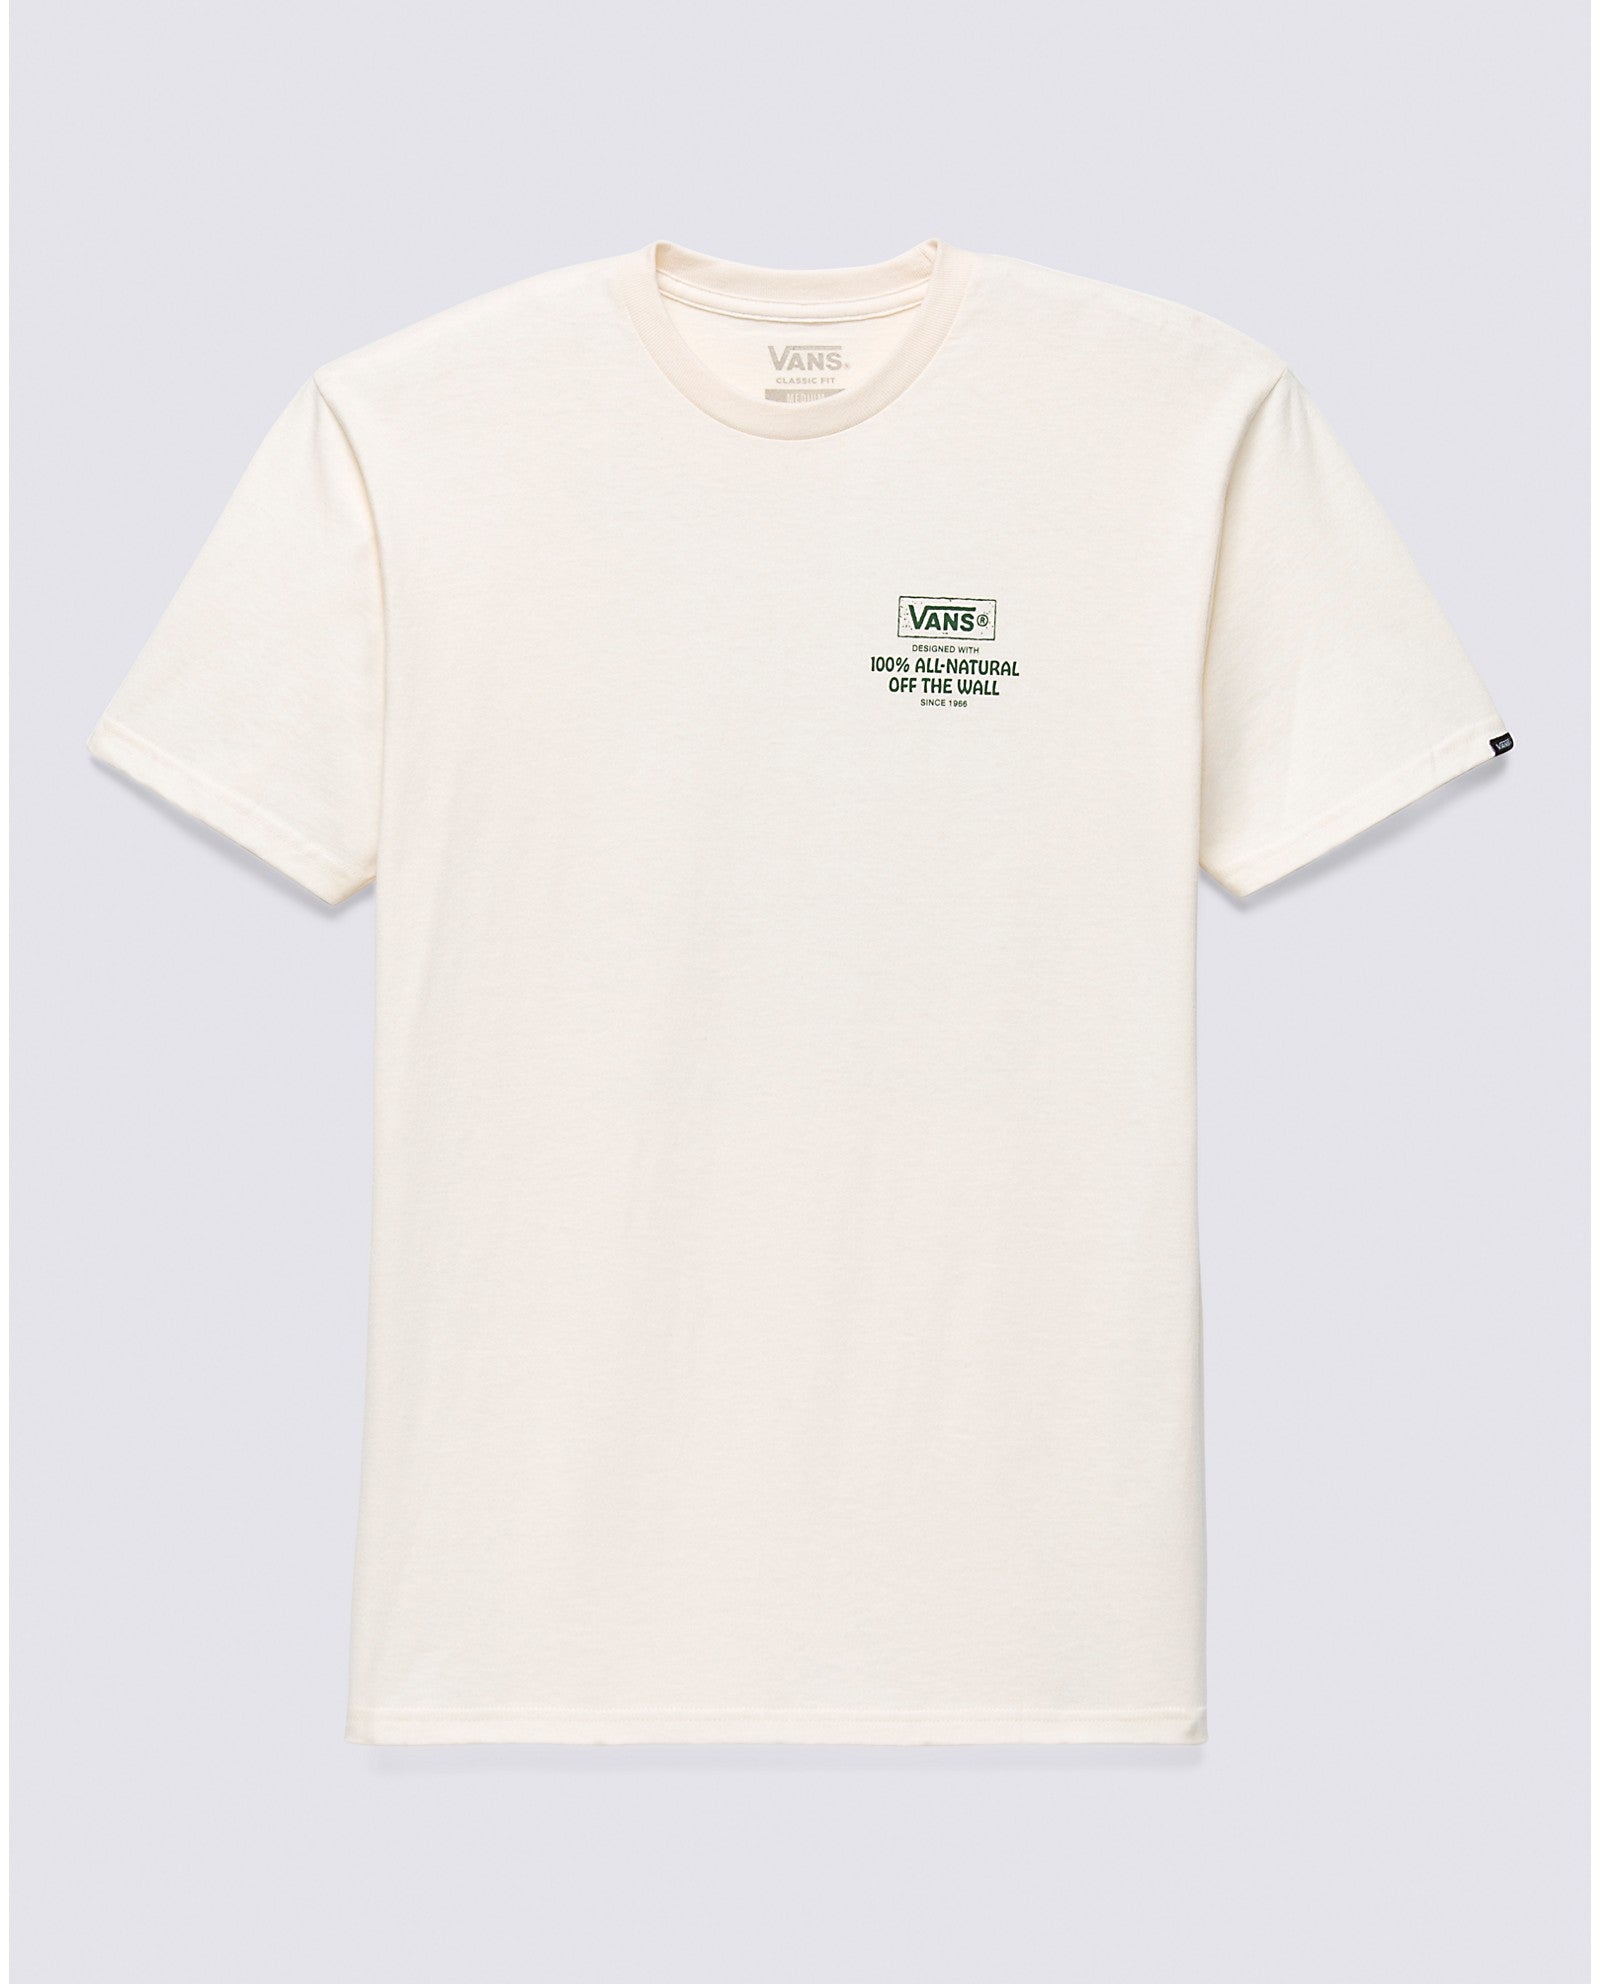 All Natural Mind SS Antique White Tee